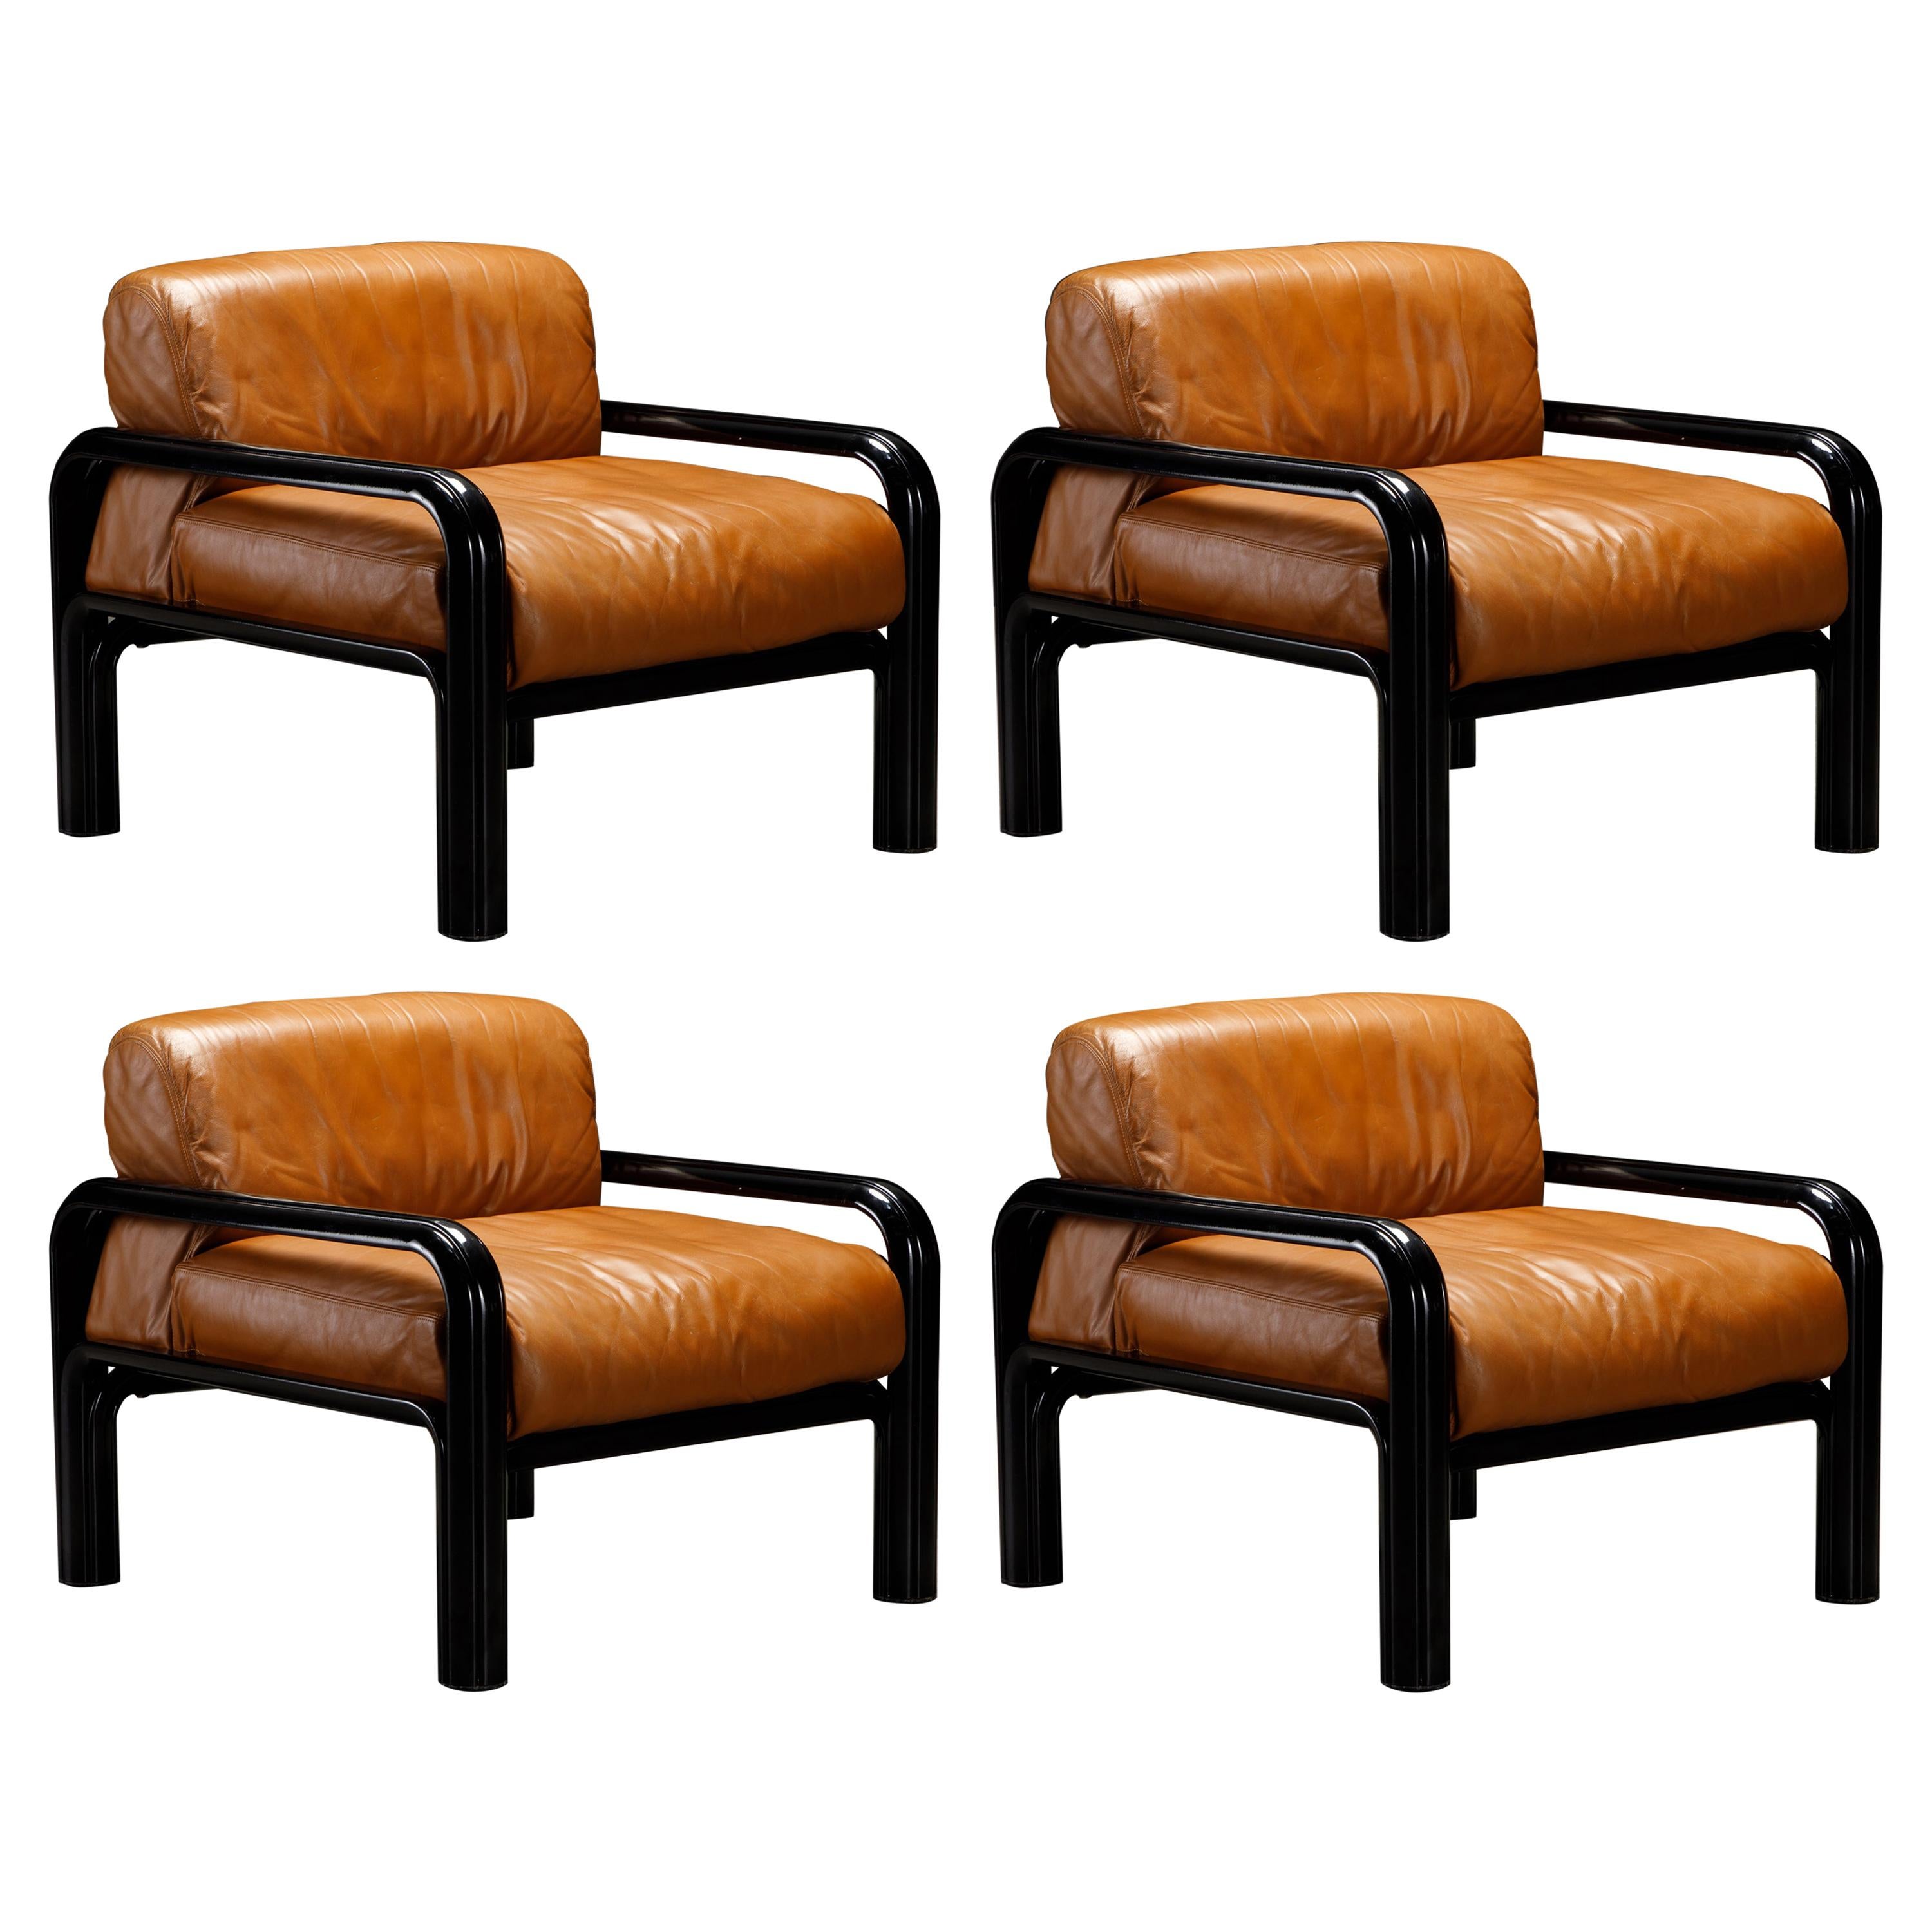 Set of 4 Gae Aulenti Leather and Steel Lounge Chairs for Knoll, Signed 1980